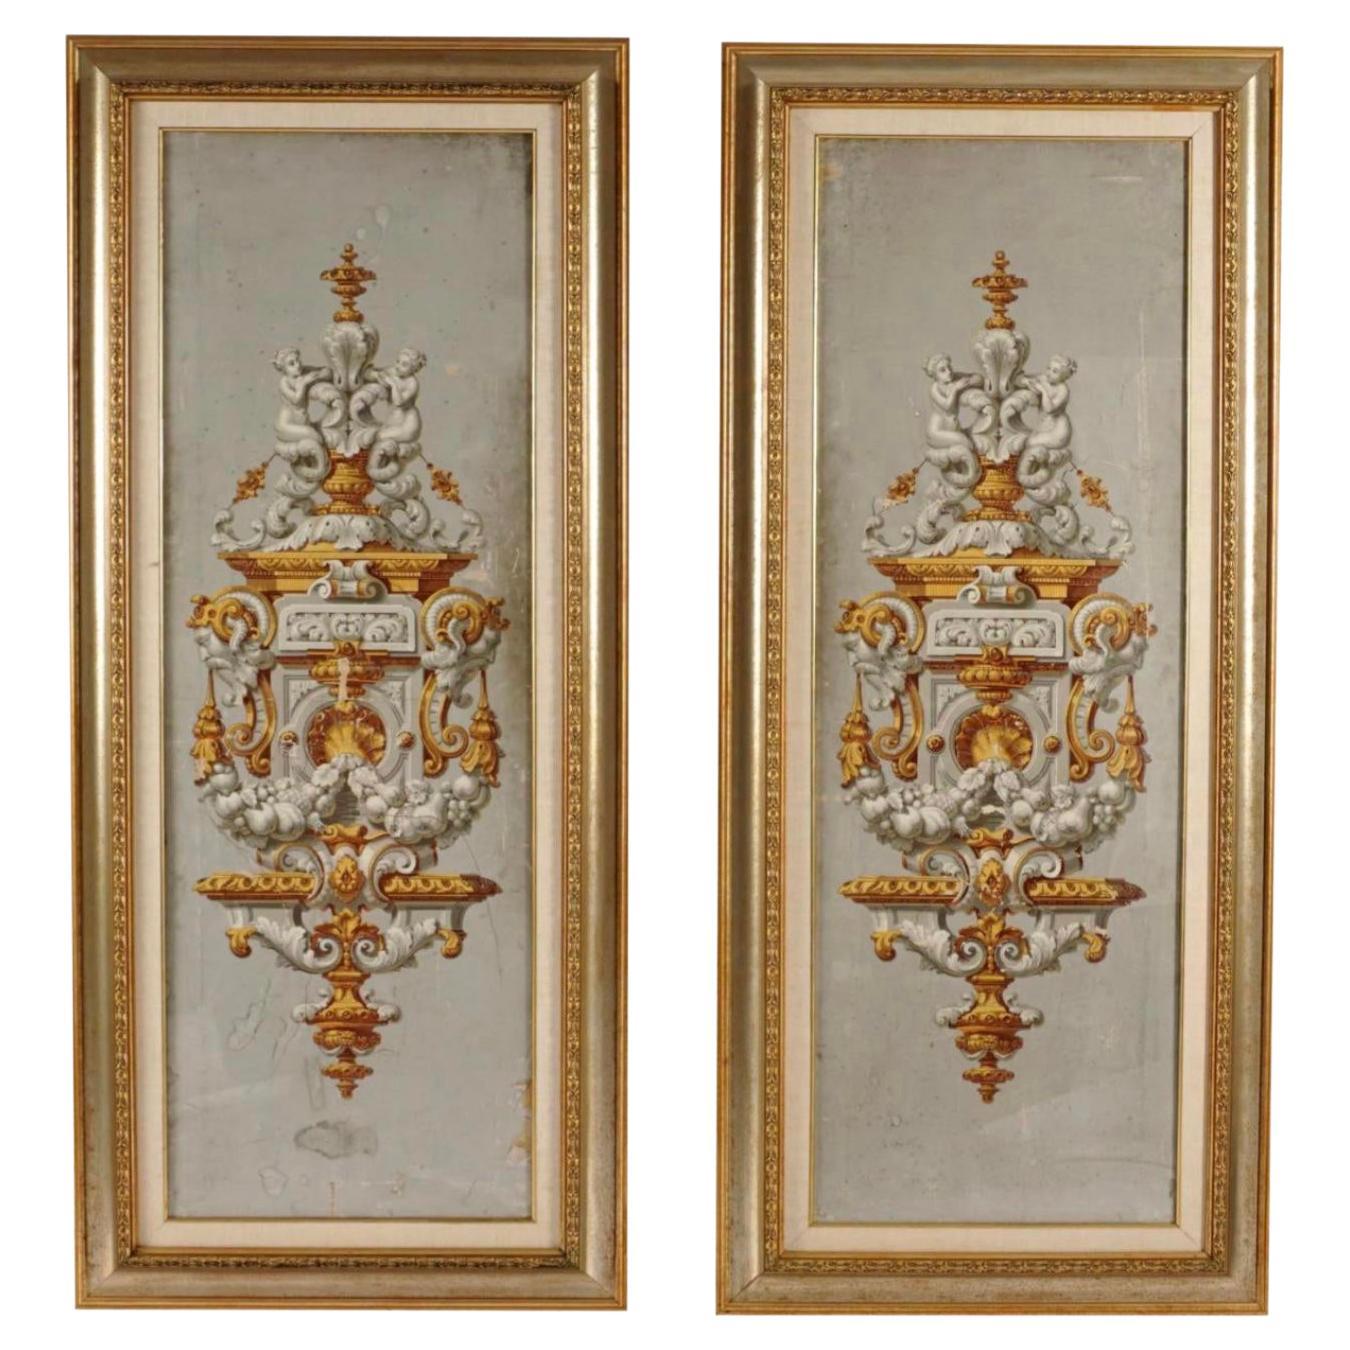 19th Century French Hand Painted Framed Wallpaper Panels, a Pair For Sale